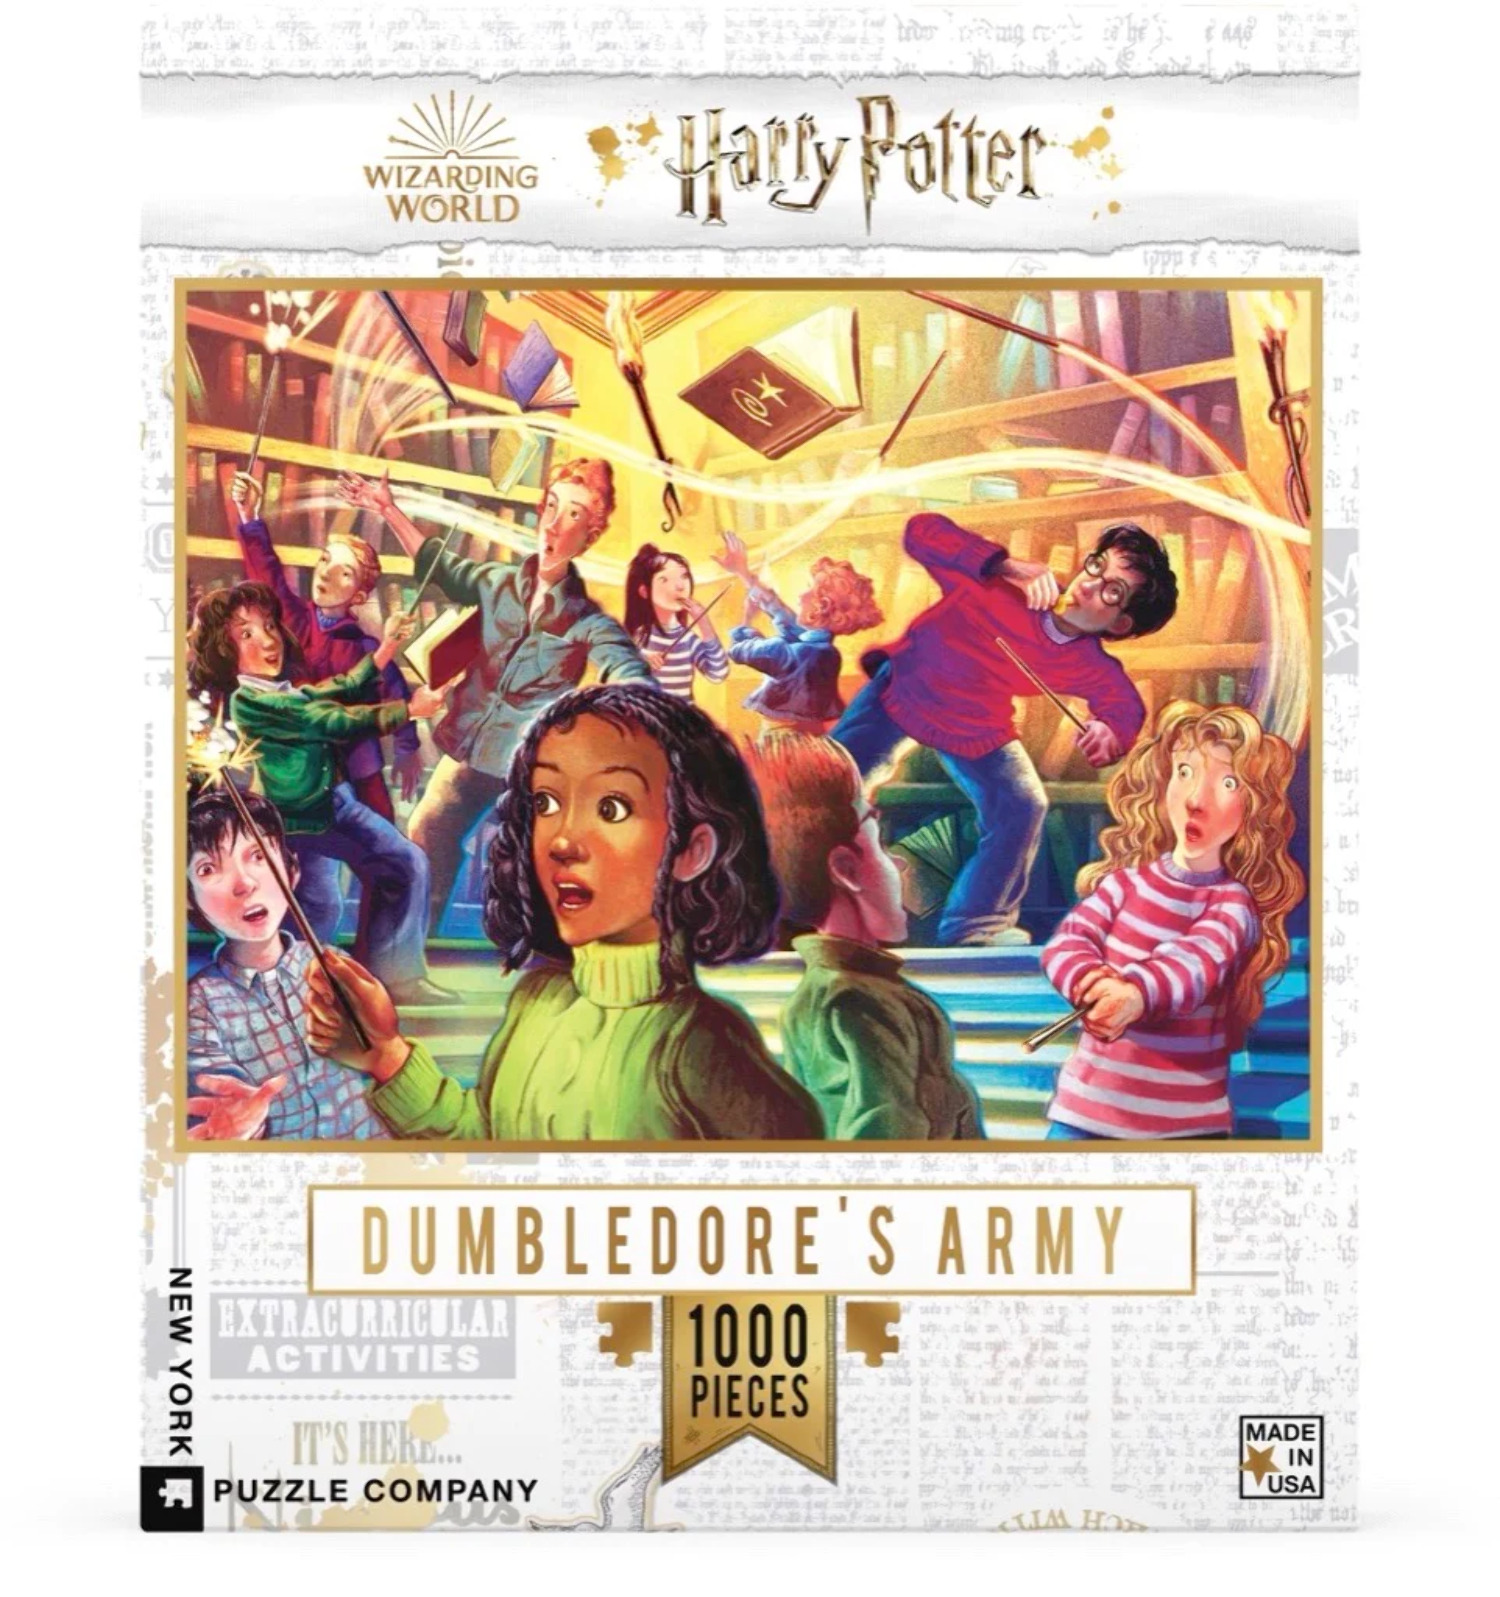 Dumbledore's Army - image 2 of 3